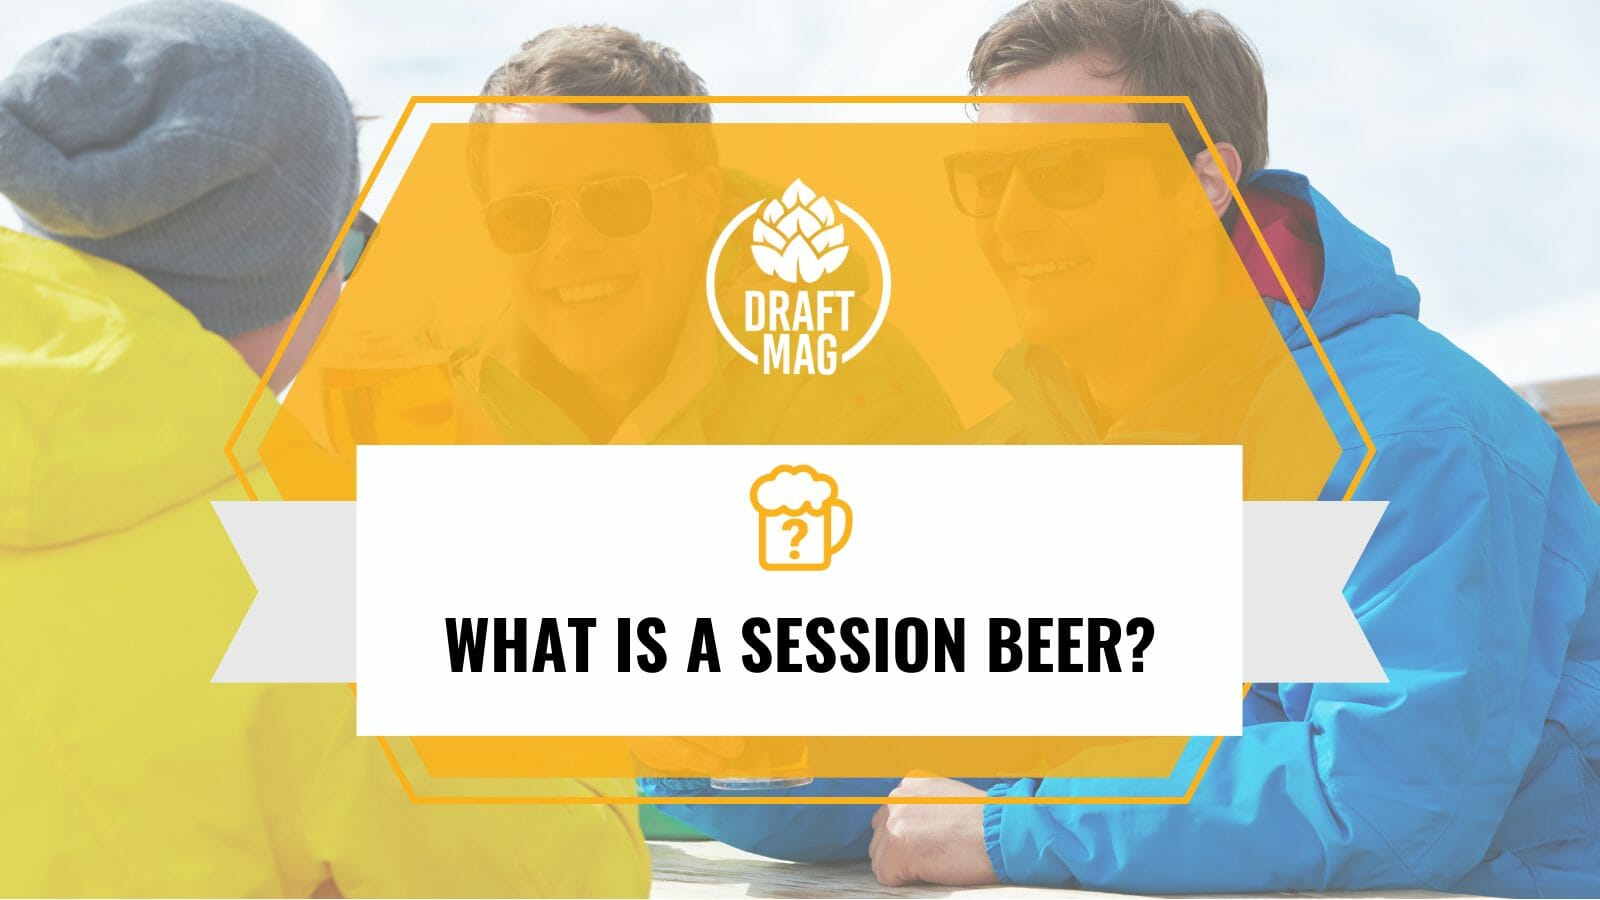 What is a session beer